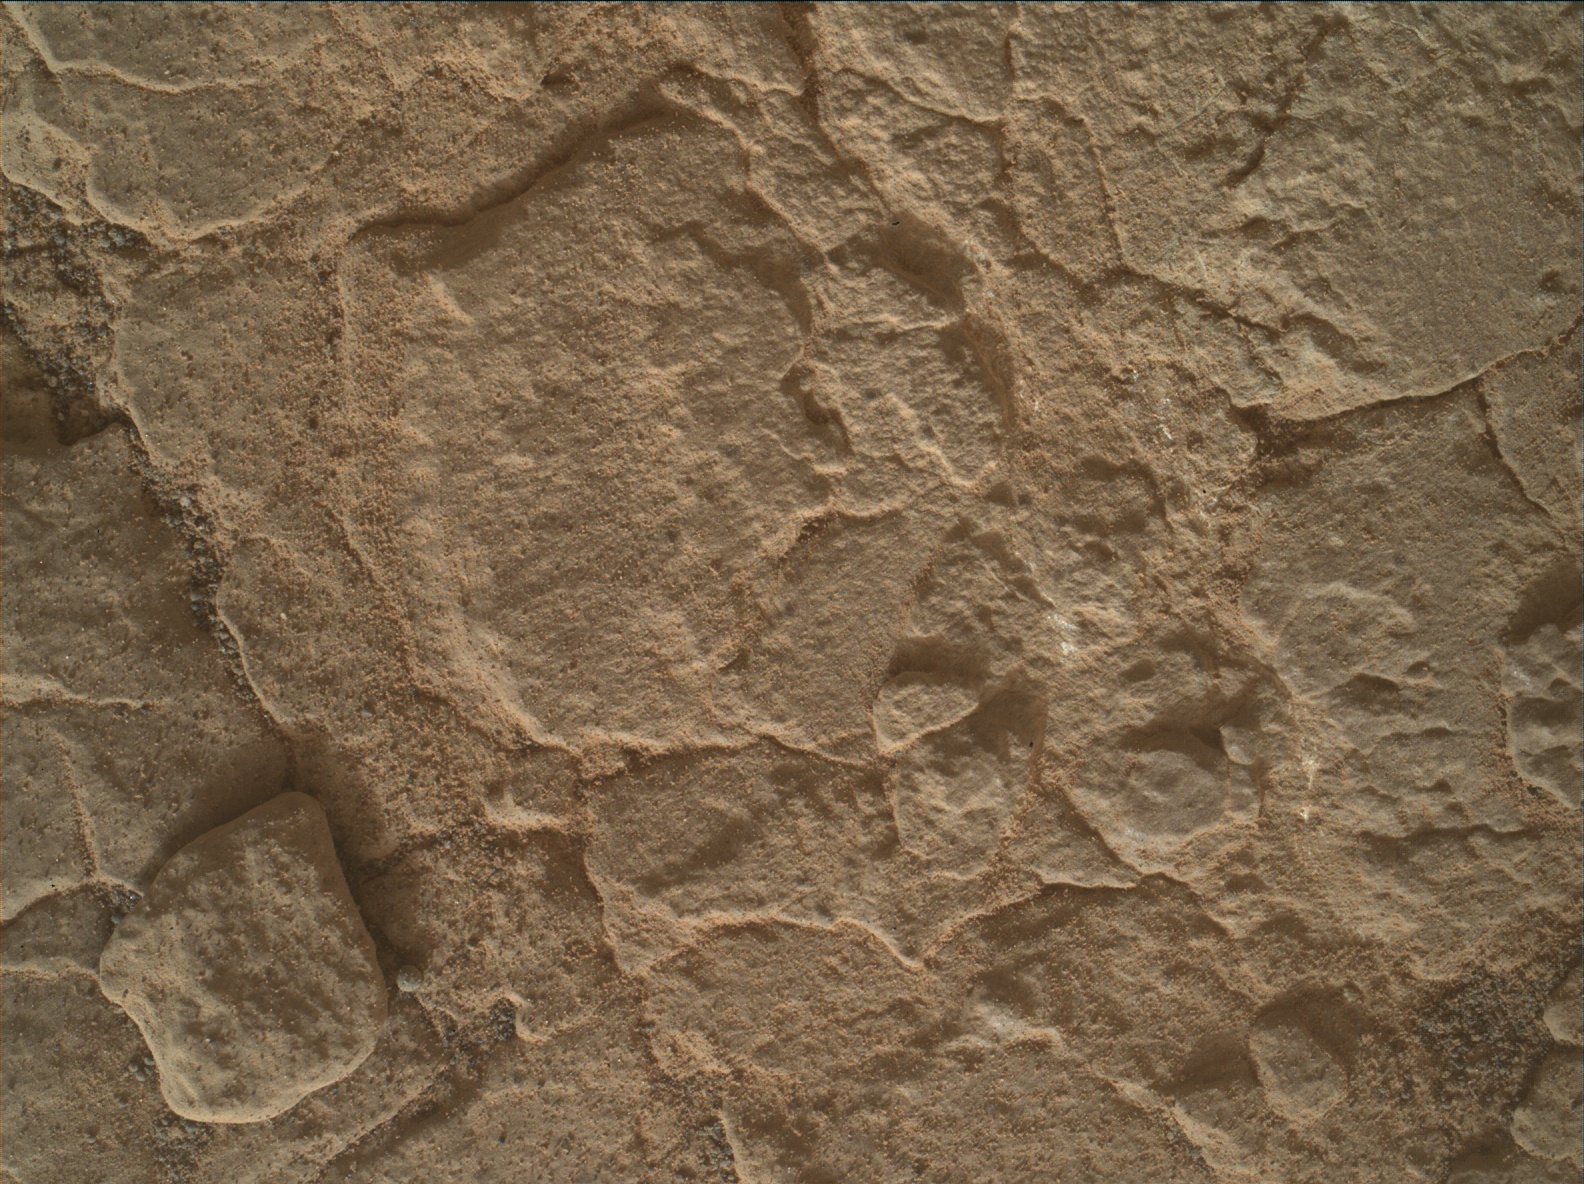 Nasa's Mars rover Curiosity acquired this image using its Mars Hand Lens Imager (MAHLI) on Sol 2867